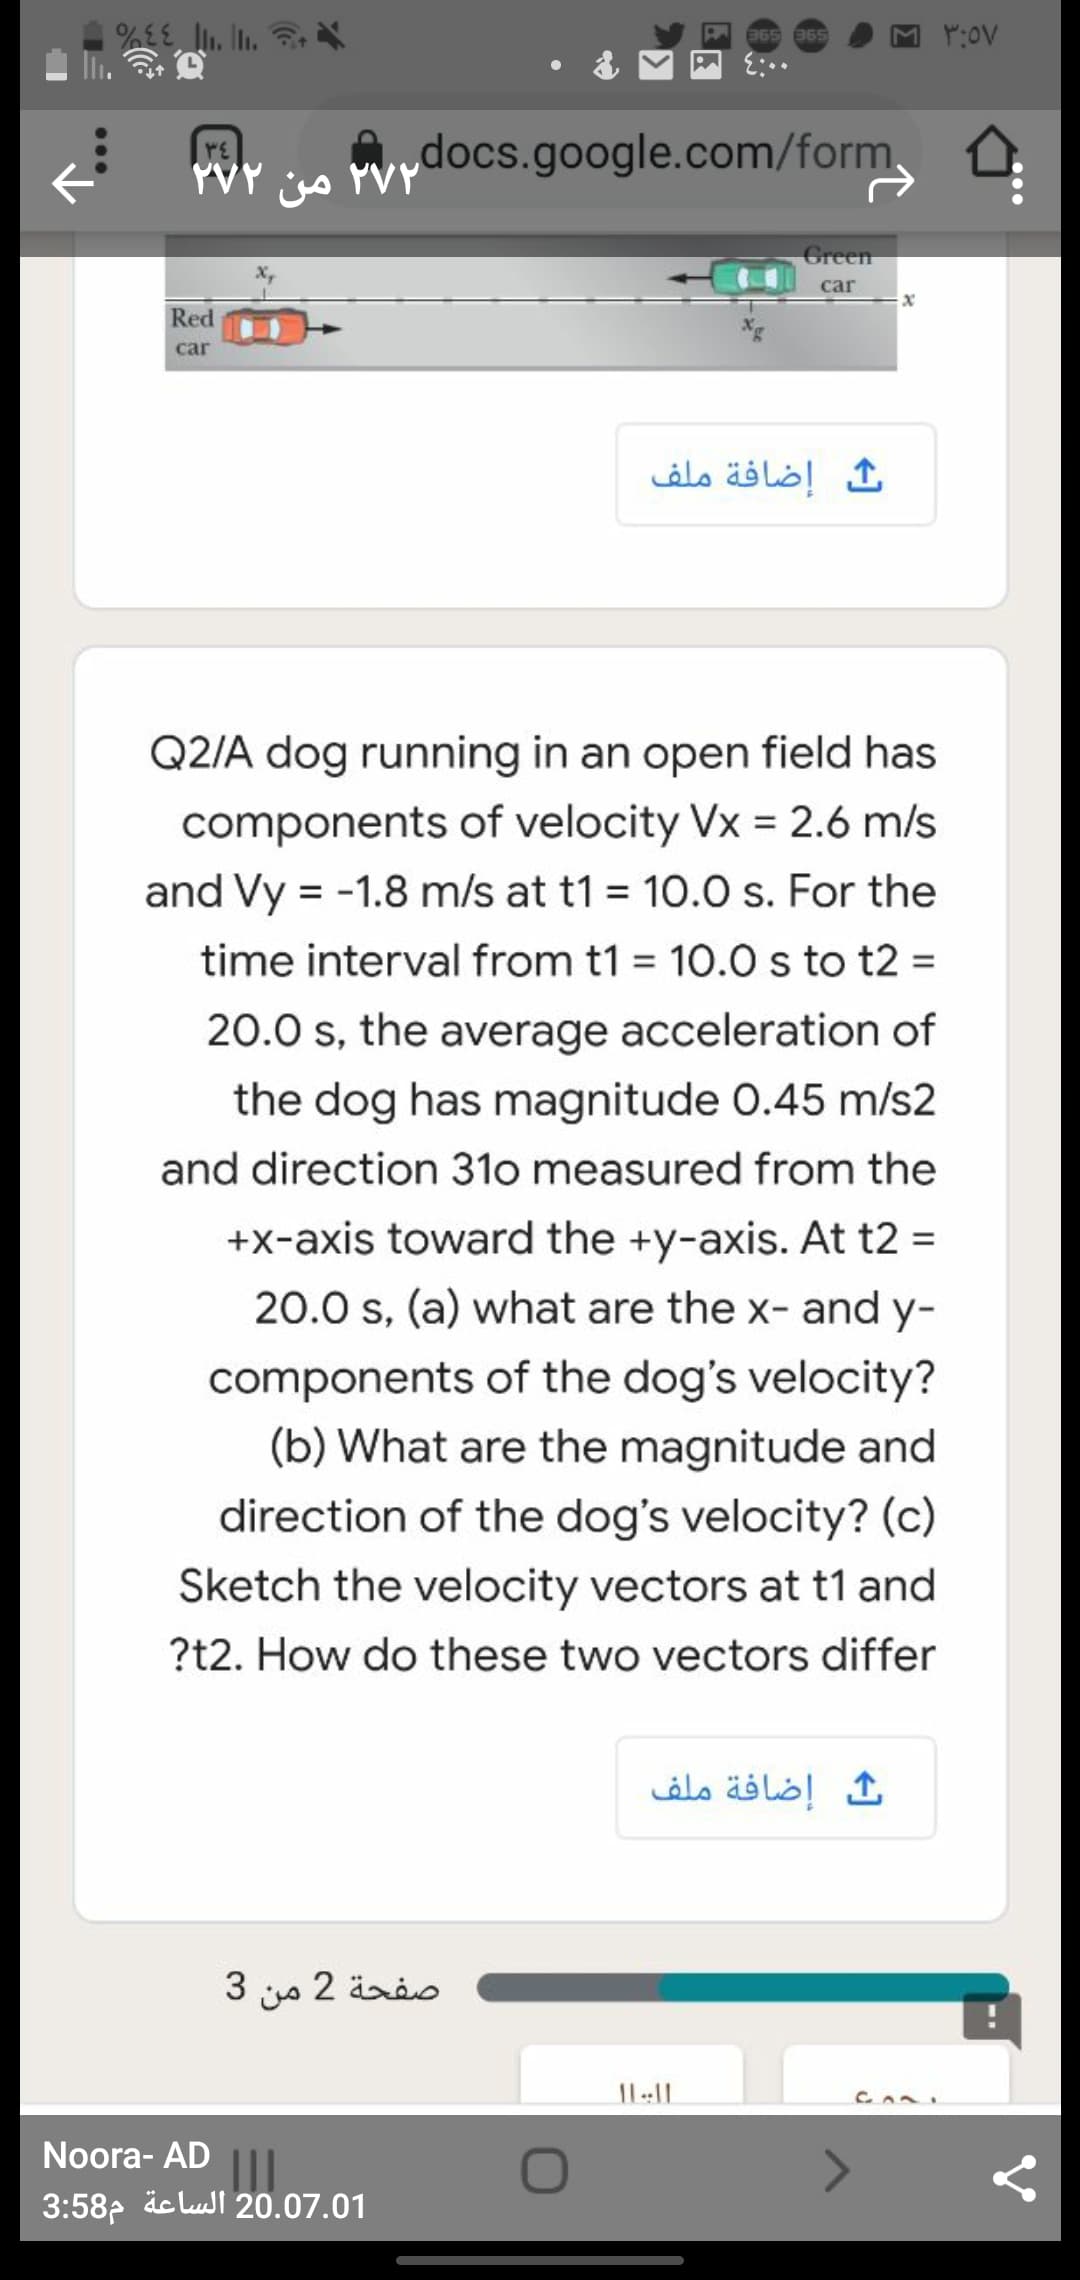 Q2/A dog running in an open field has
components of velocity Vx = 2.6 m/s
and Vy = -1.8 m/s at t1 = 10.0 s. For the
time interval from t1 = 10.0 s to t2 =
%3D
%3D
20.0 s, the average acceleration of
the dog has magnitude 0.45 m/s2
and direction 31o measured from the
+x-axis toward the +y-axis. At t2 =
20.0 s, (a) what are the x- and y-
components of the dog's velocity?
(b) What are the magnitude and
direction of the dog's velocity? (c)
Sketch the velocity vectors at t1 and
?t2. How do these two vectors differ
